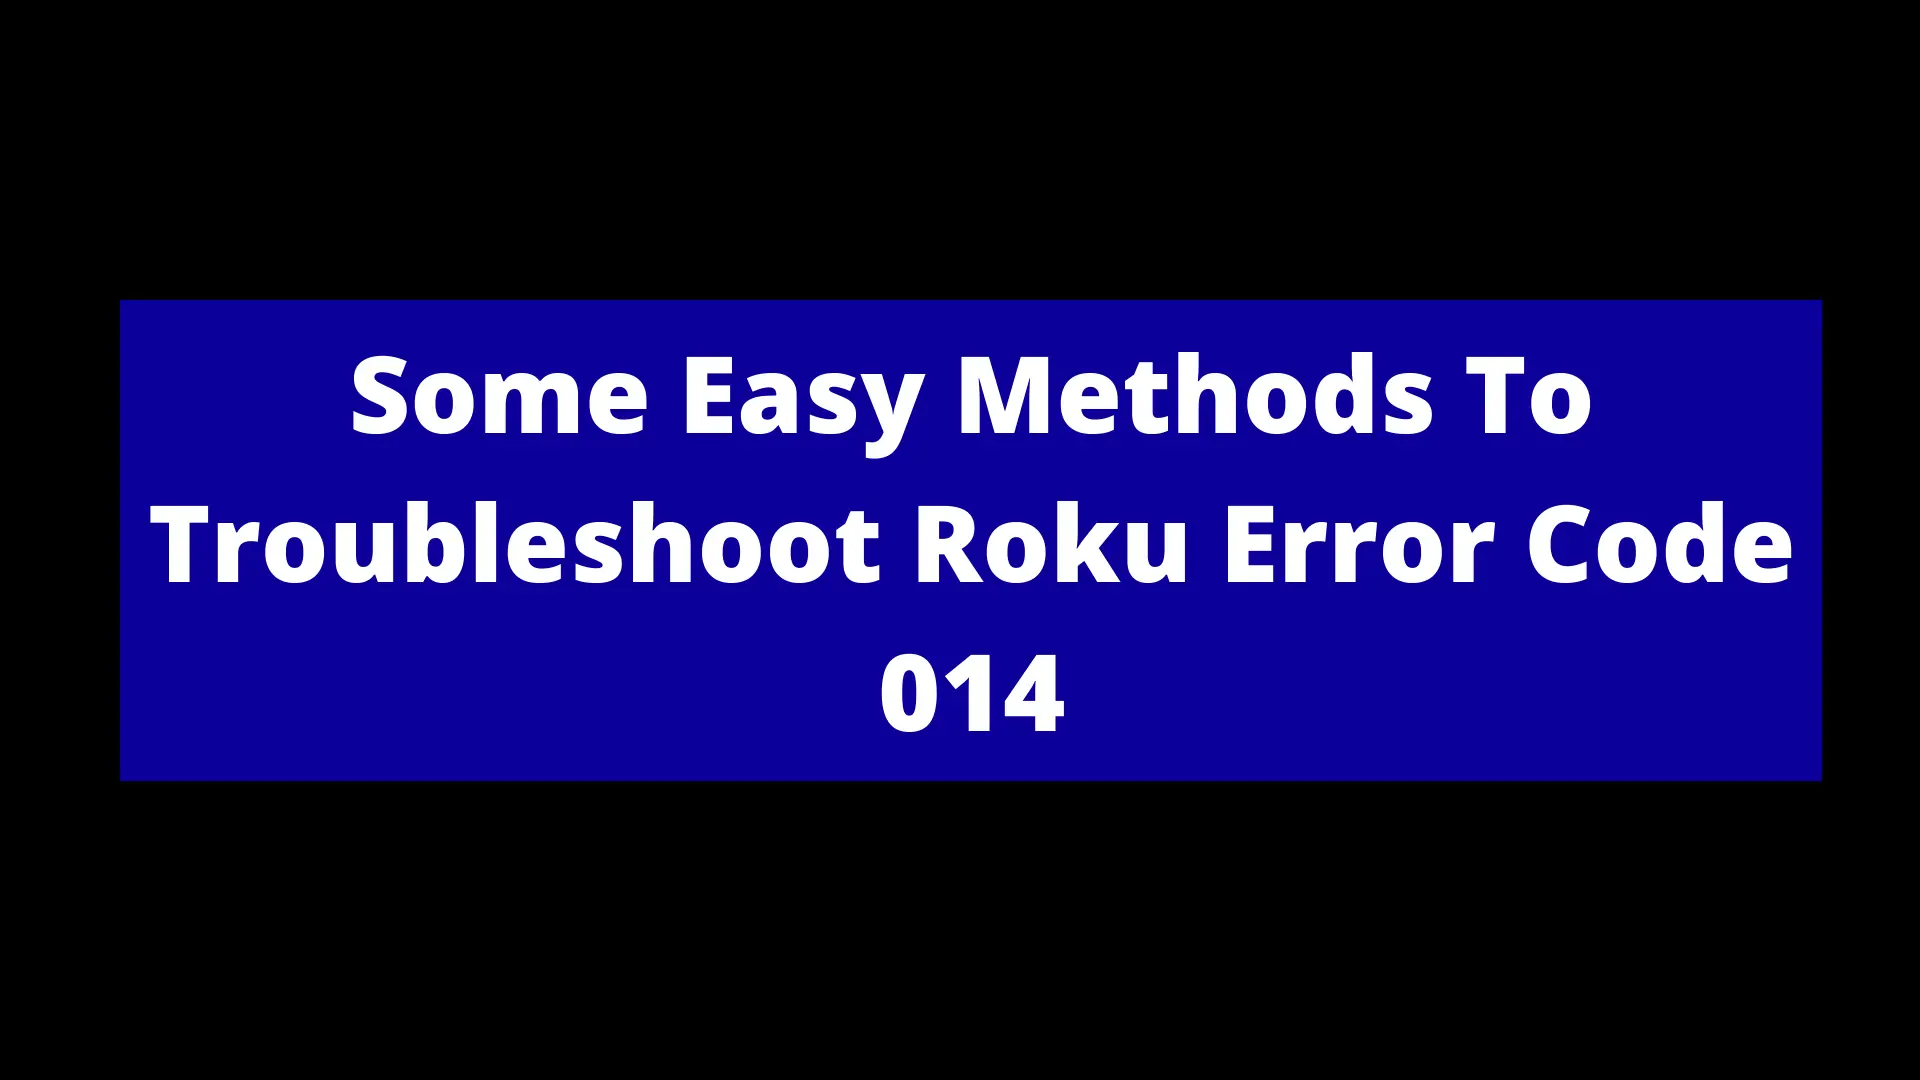 You are currently viewing Some Easy Methods To Troubleshoot Roku Error Code 014